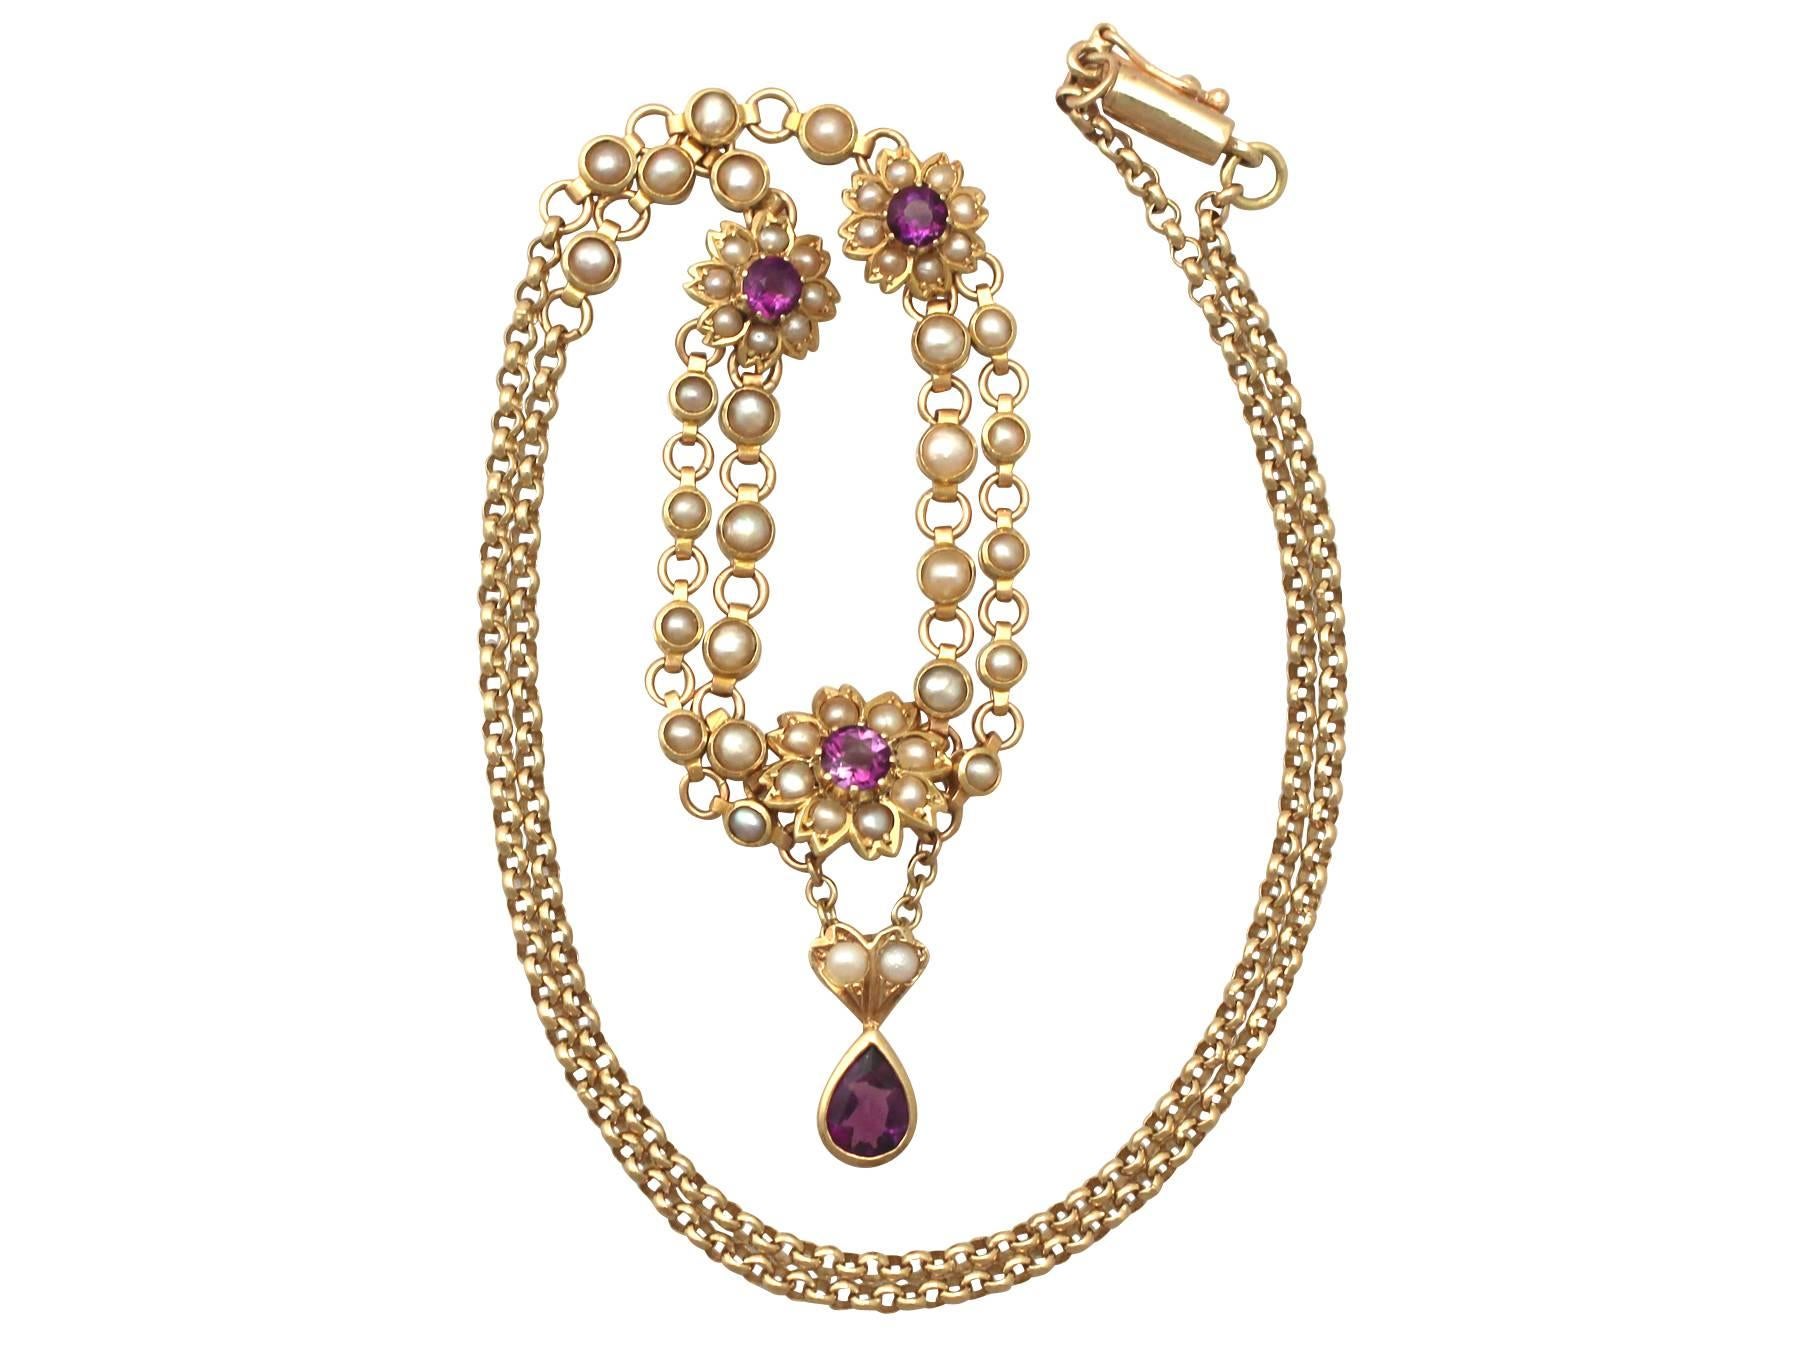 This fine and impressive antique necklace has been crafted in 9K yellow gold.

The 9K yellow belcher chain supports a pearl embellished design accented with three floral motifs, the central flower head being the largest.

Each of the flowers is